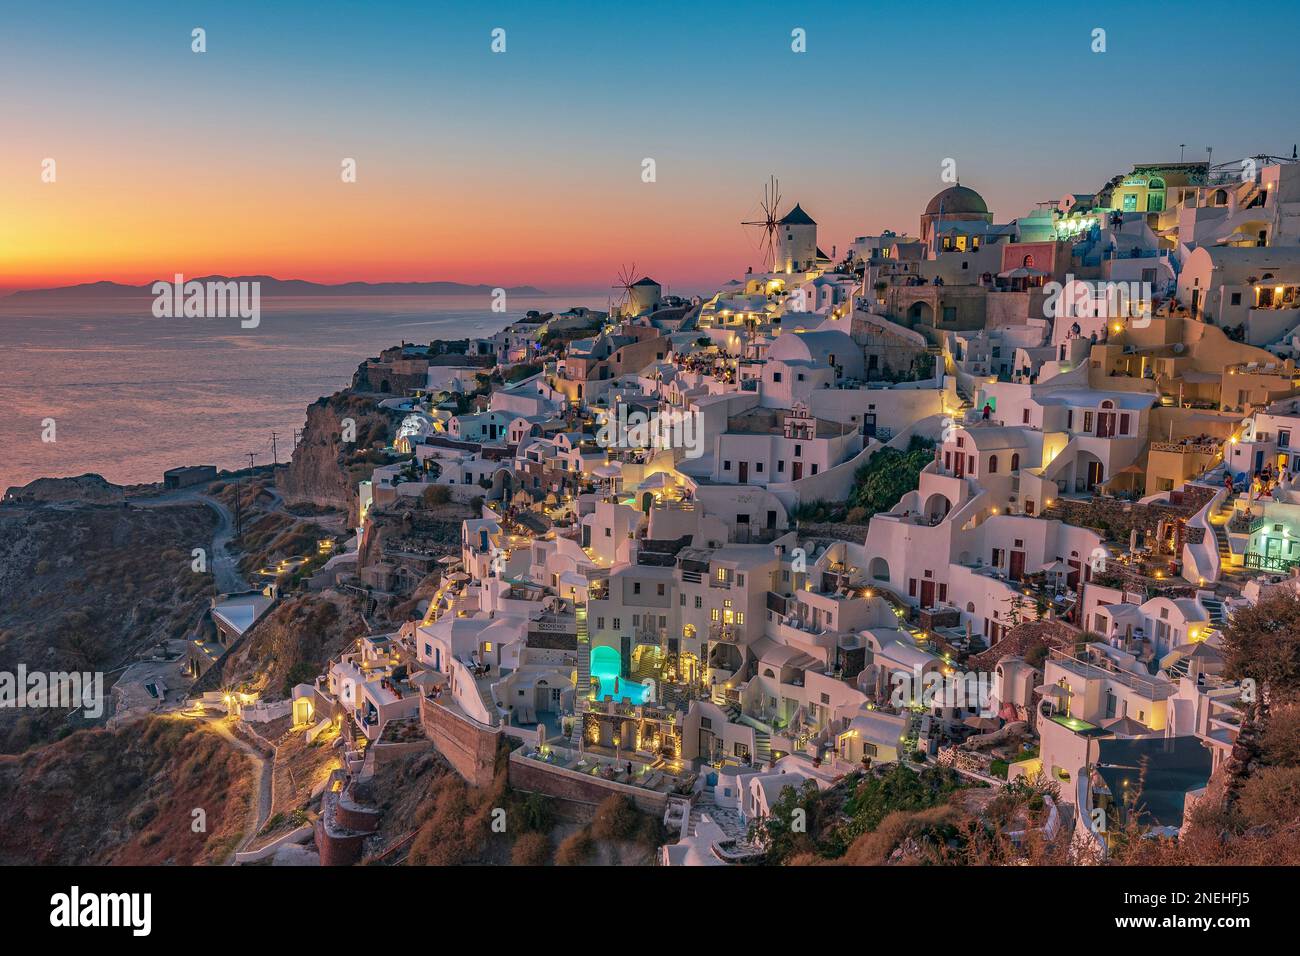 The picturesque village of Oia at dusk, Santorini Stock Photo